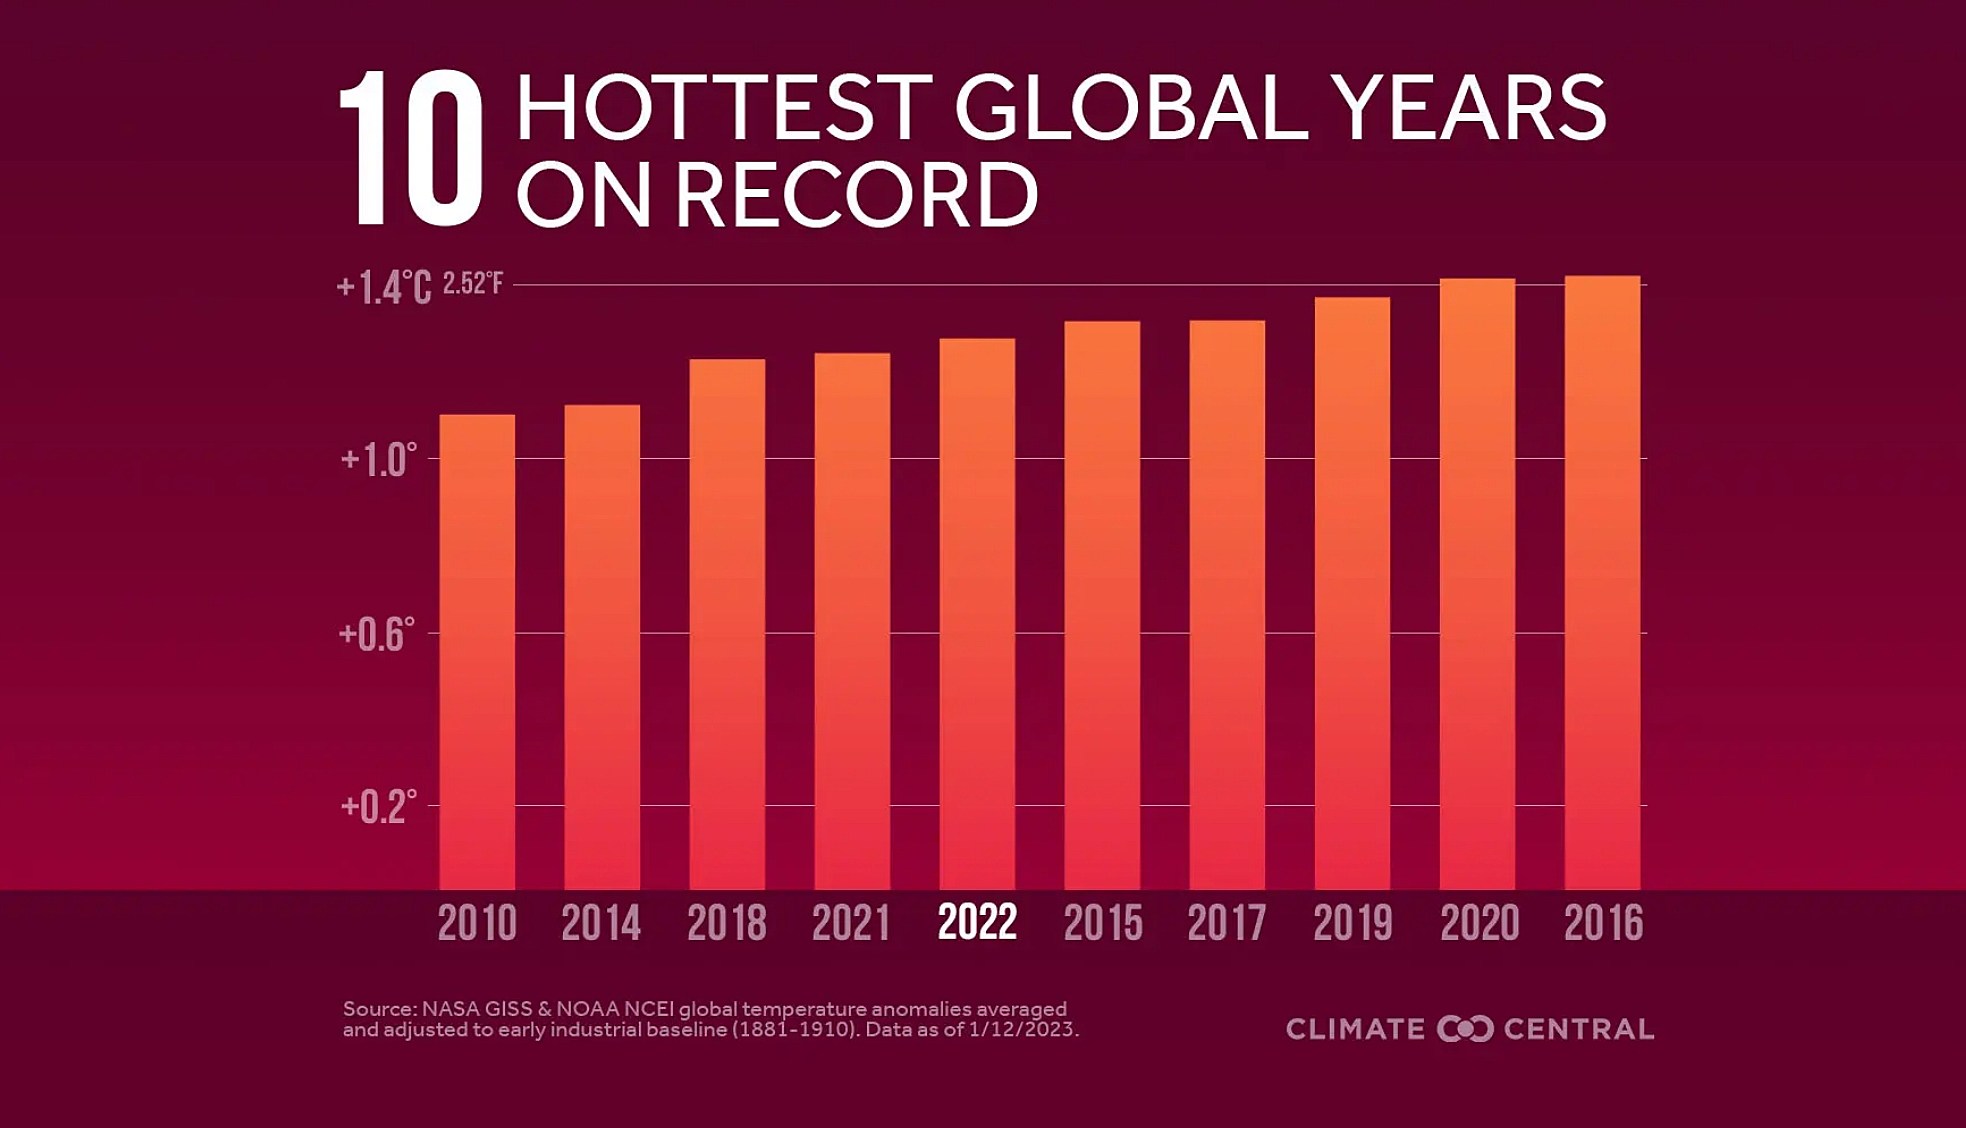 I think I detect a trend? Credit: Climate Central